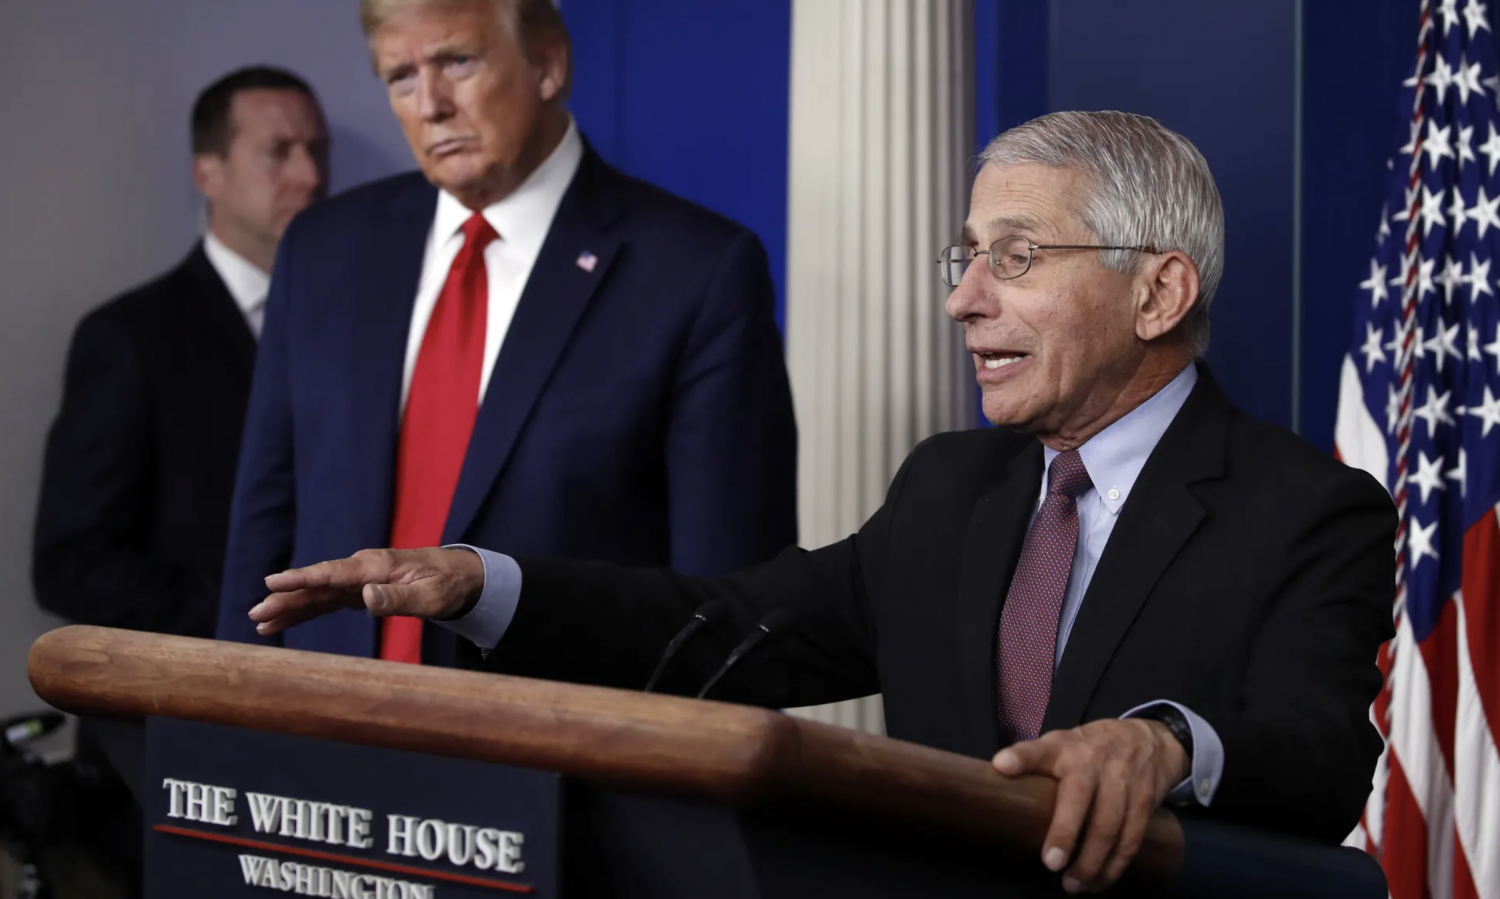 'A whole lot of hurt': Fauci angers Trump White House with dark Covid outlook